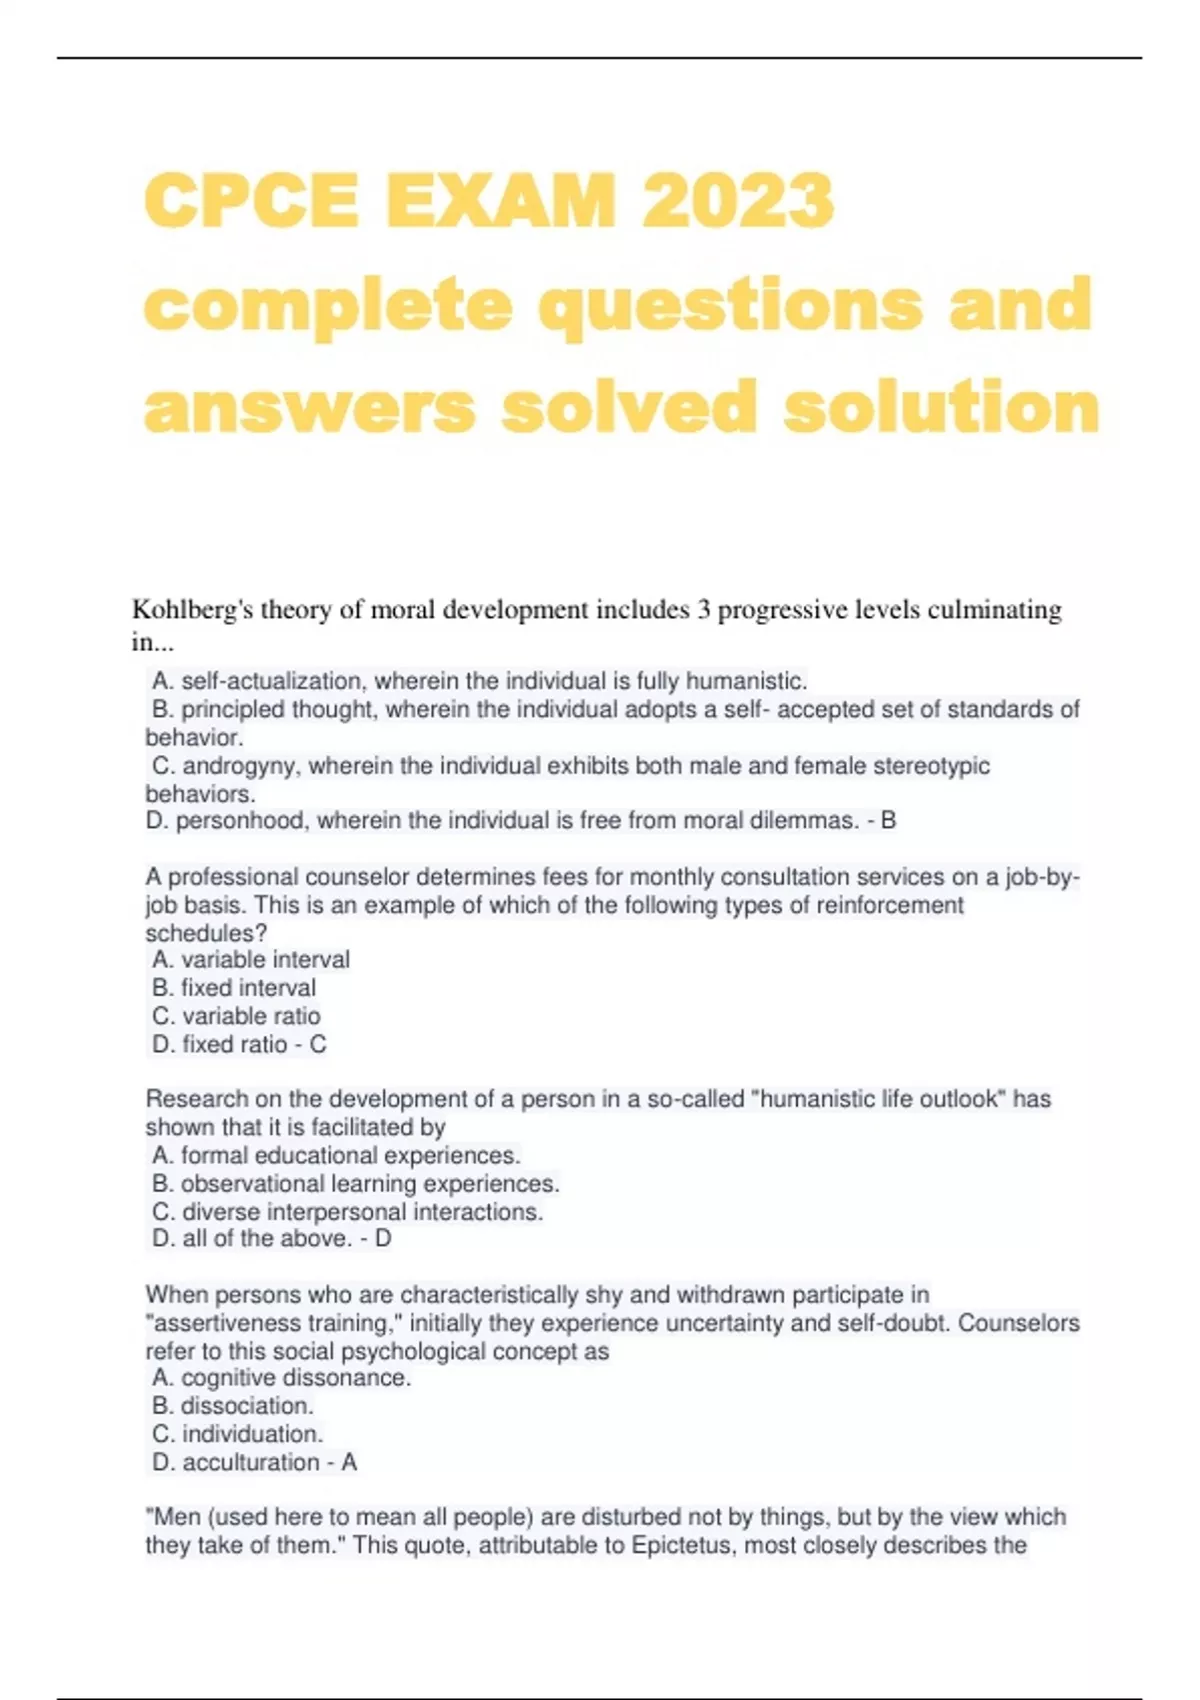 Complete each questionnaire entirely by answering